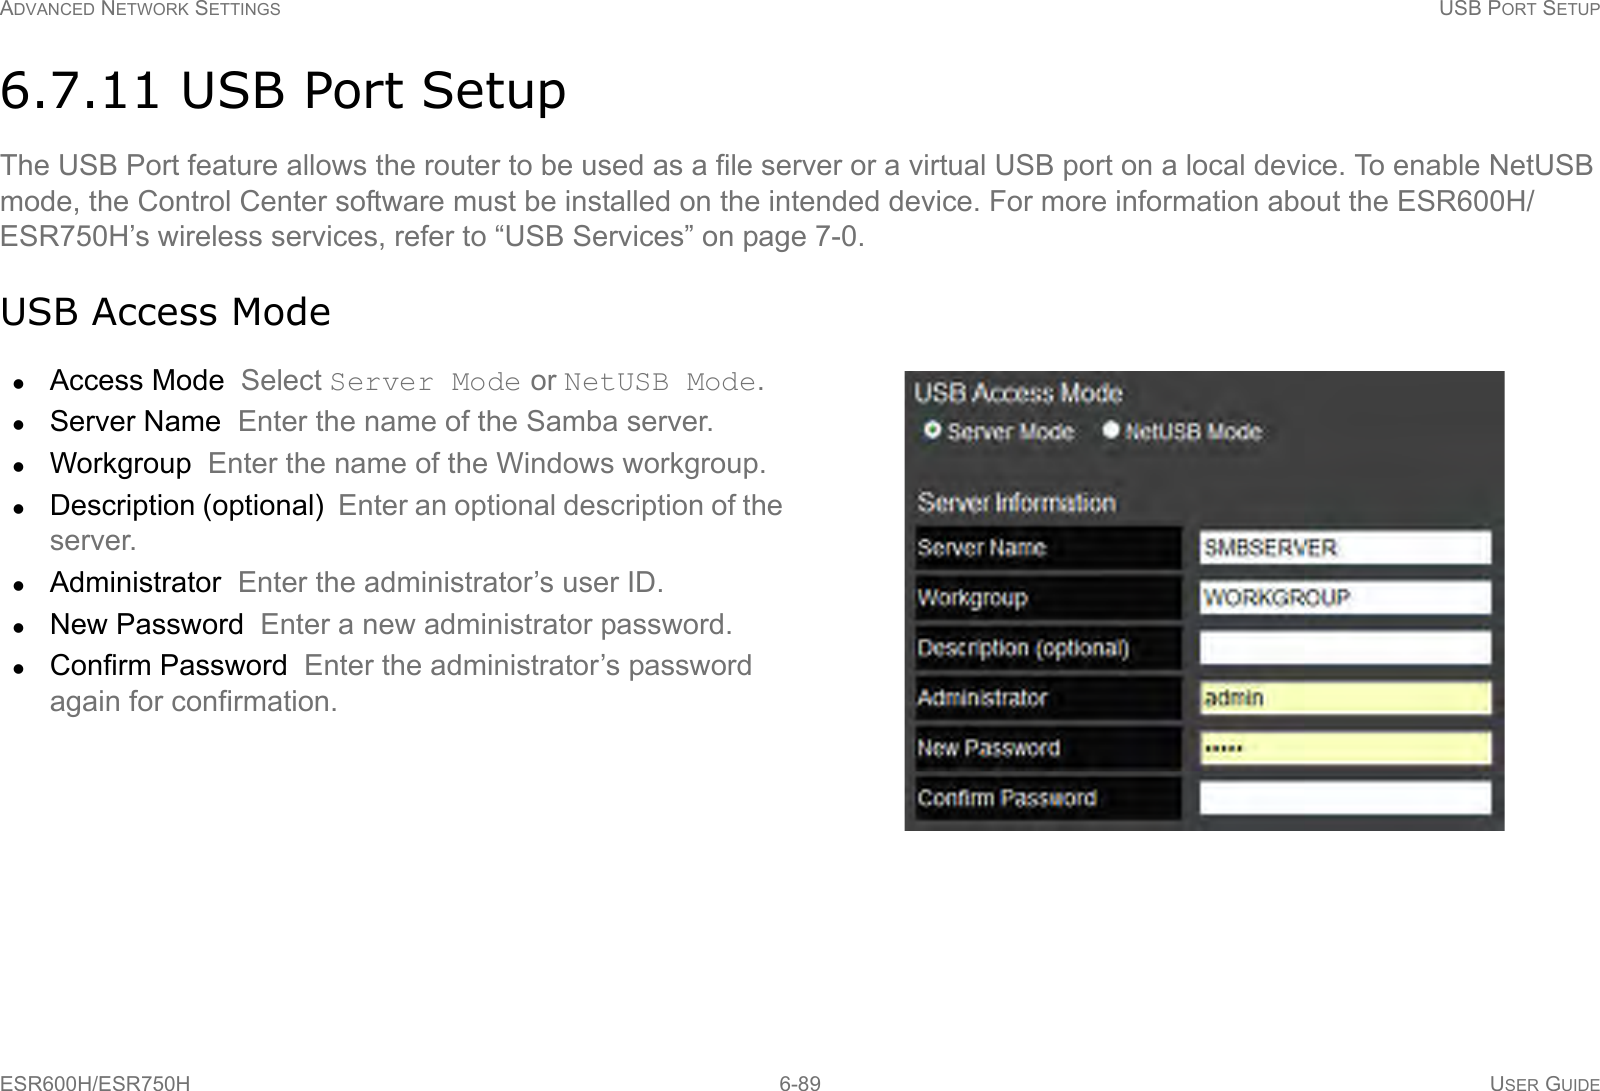 ADVANCED NETWORK SETTINGS USB PORT SETUPESR600H/ESR750H 6-89 USER GUIDE6.7.11 USB Port SetupThe USB Port feature allows the router to be used as a file server or a virtual USB port on a local device. To enable NetUSB mode, the Control Center software must be installed on the intended device. For more information about the ESR600H/ESR750H’s wireless services, refer to “USB Services” on page 7-0.USB Access ModeAccess Mode  Select Server Mode or NetUSB Mode.Server Name  Enter the name of the Samba server.Workgroup  Enter the name of the Windows workgroup.Description (optional)  Enter an optional description of the server.Administrator  Enter the administrator’s user ID.New Password  Enter a new administrator password.Confirm Password  Enter the administrator’s password again for confirmation.